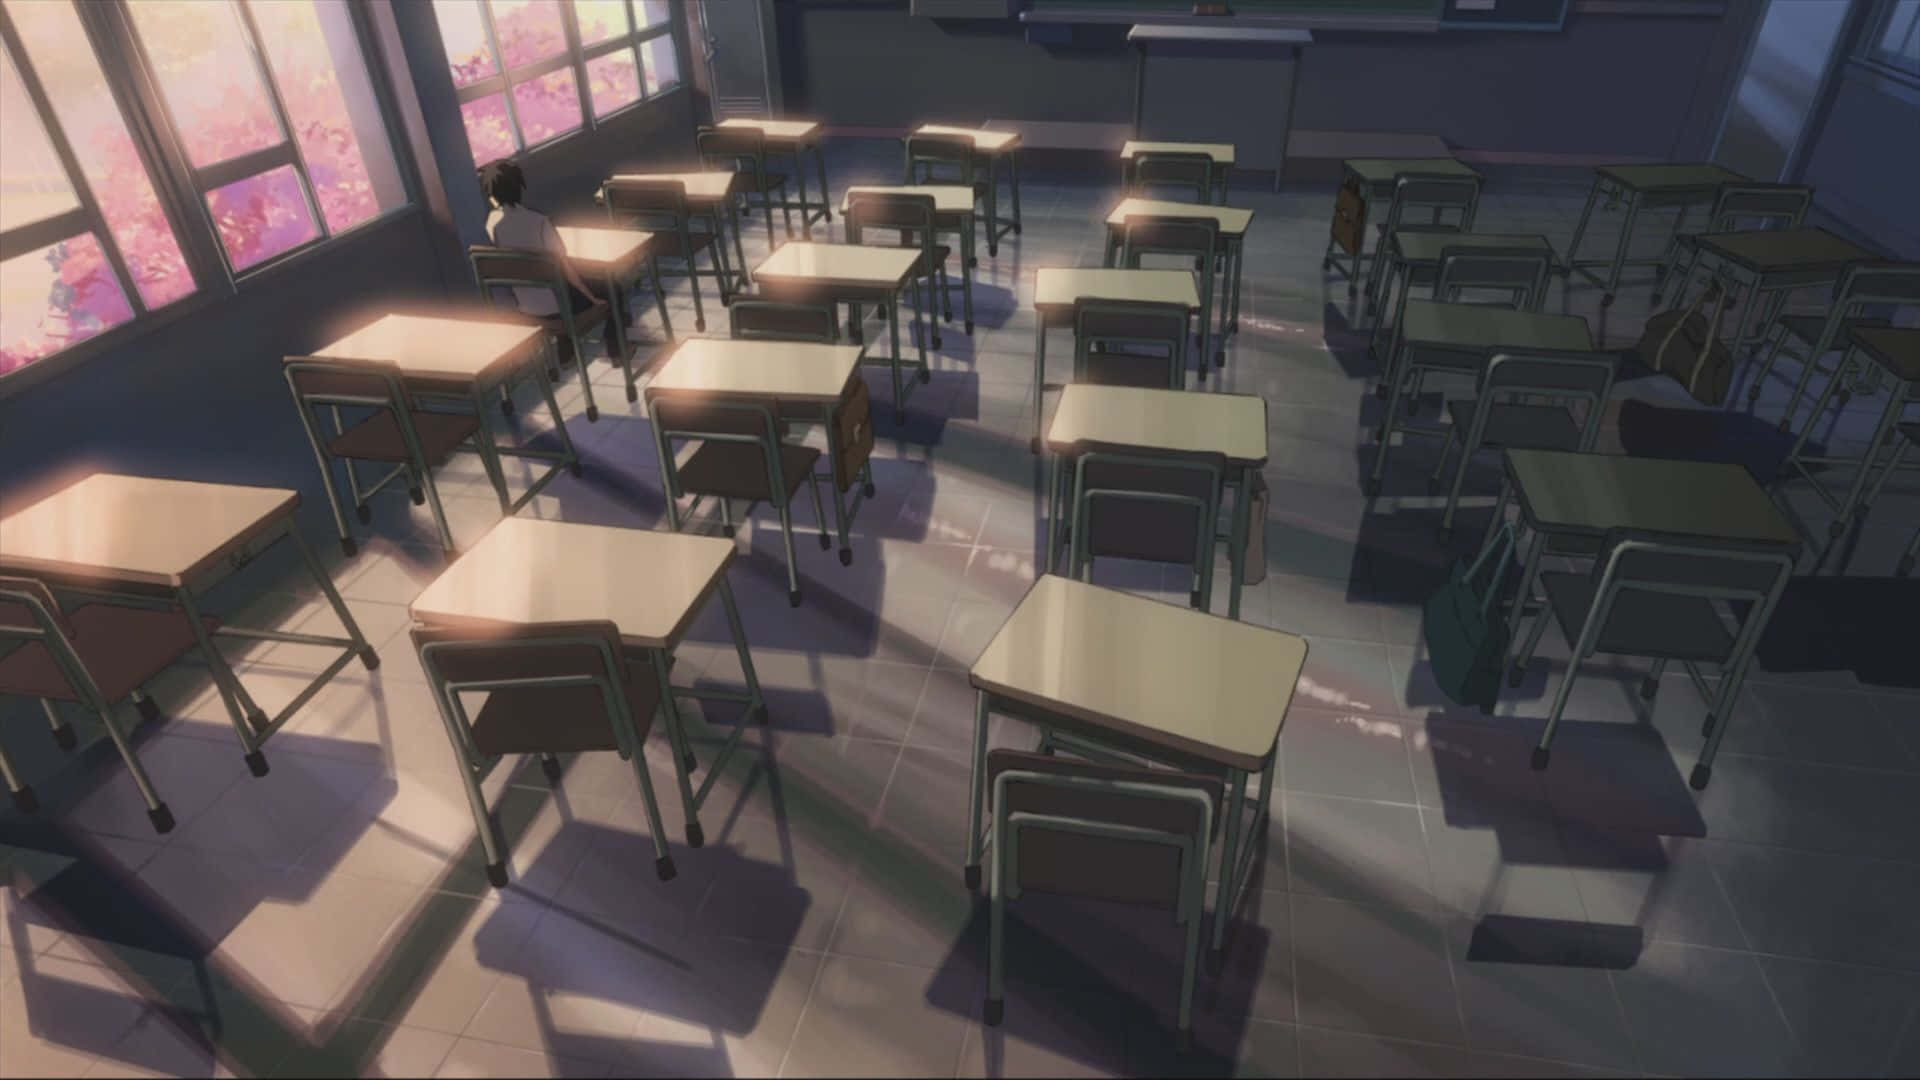 An anime classroom - the perfect place to learn and grow!